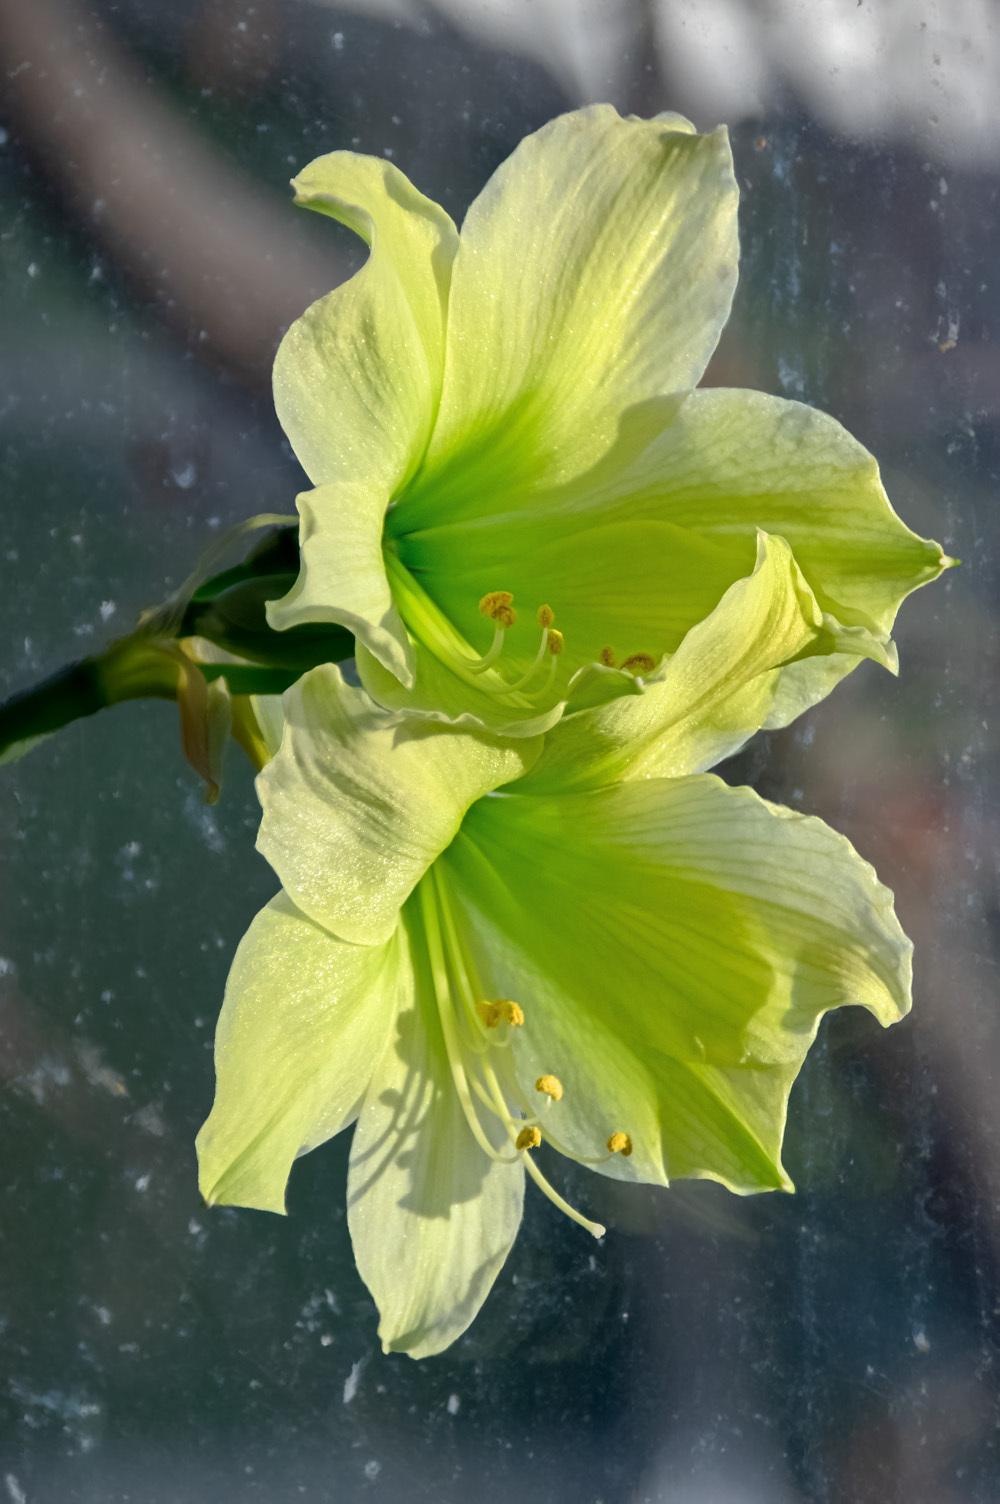 Photo of Amaryllis (Hippeastrum 'Lemon and Lime') uploaded by dirtdorphins